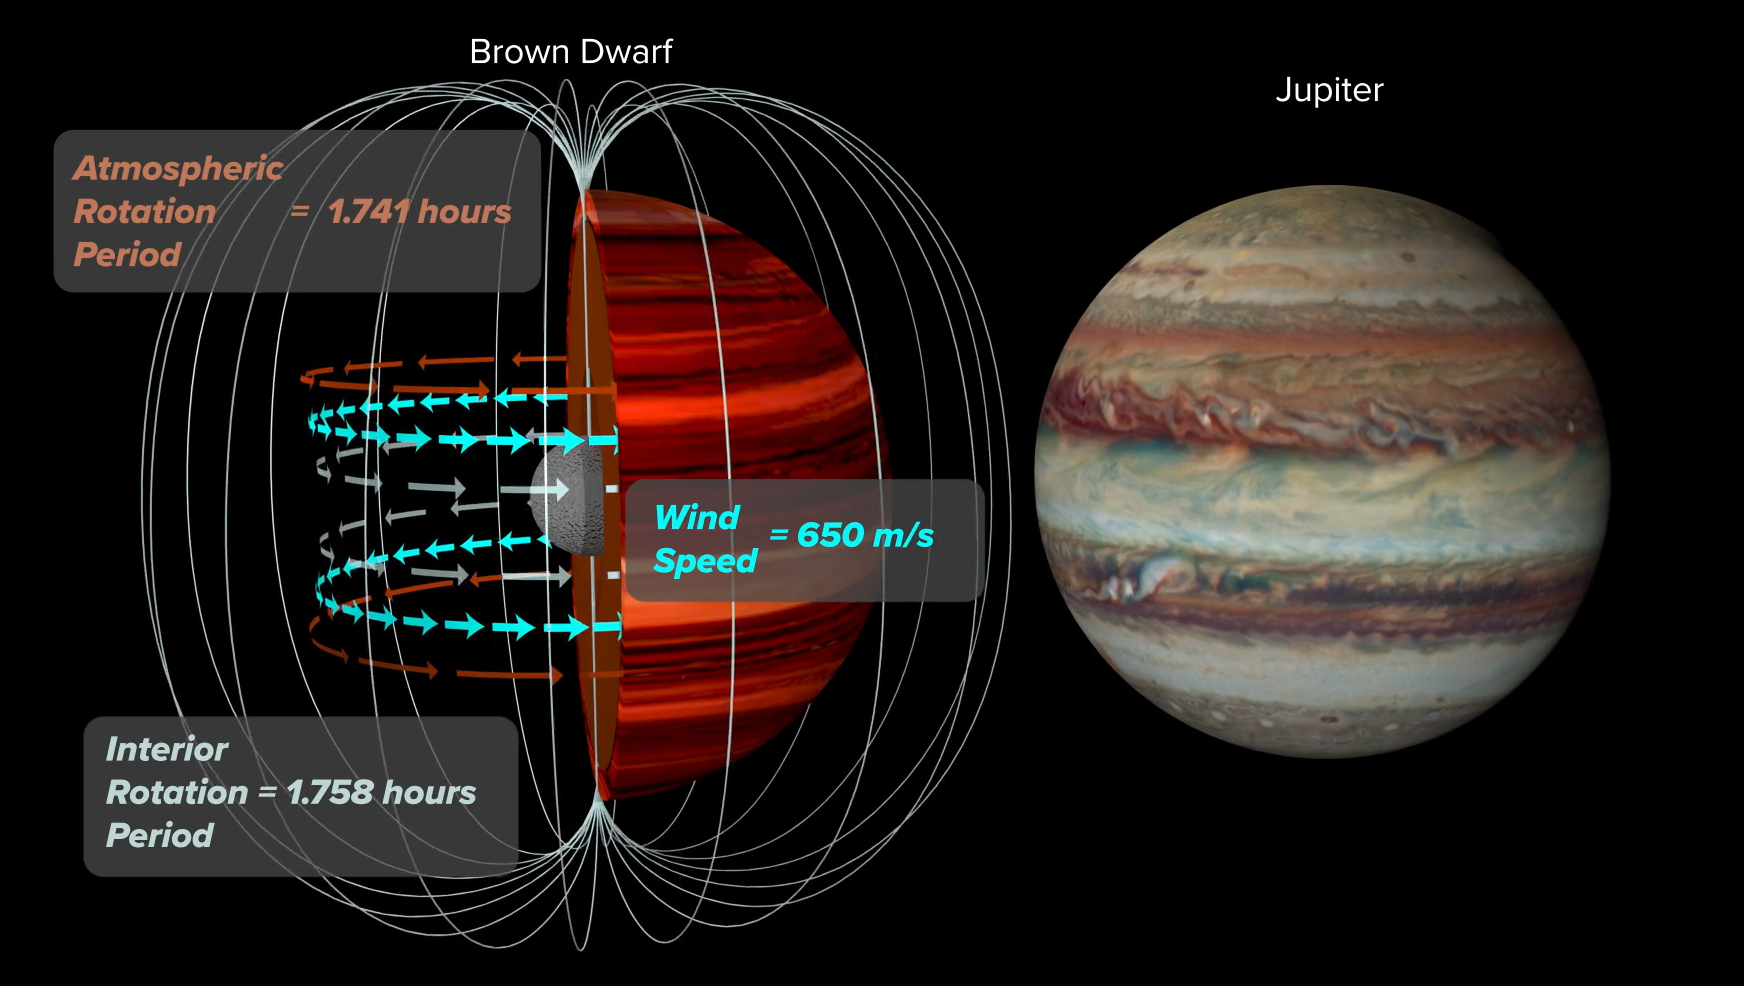 Artist's conception, of the atmospheric and interior rotation periods, and windspeed on brown dwarf 2MASS J1047+21 set next to Jupiter for size comparison.